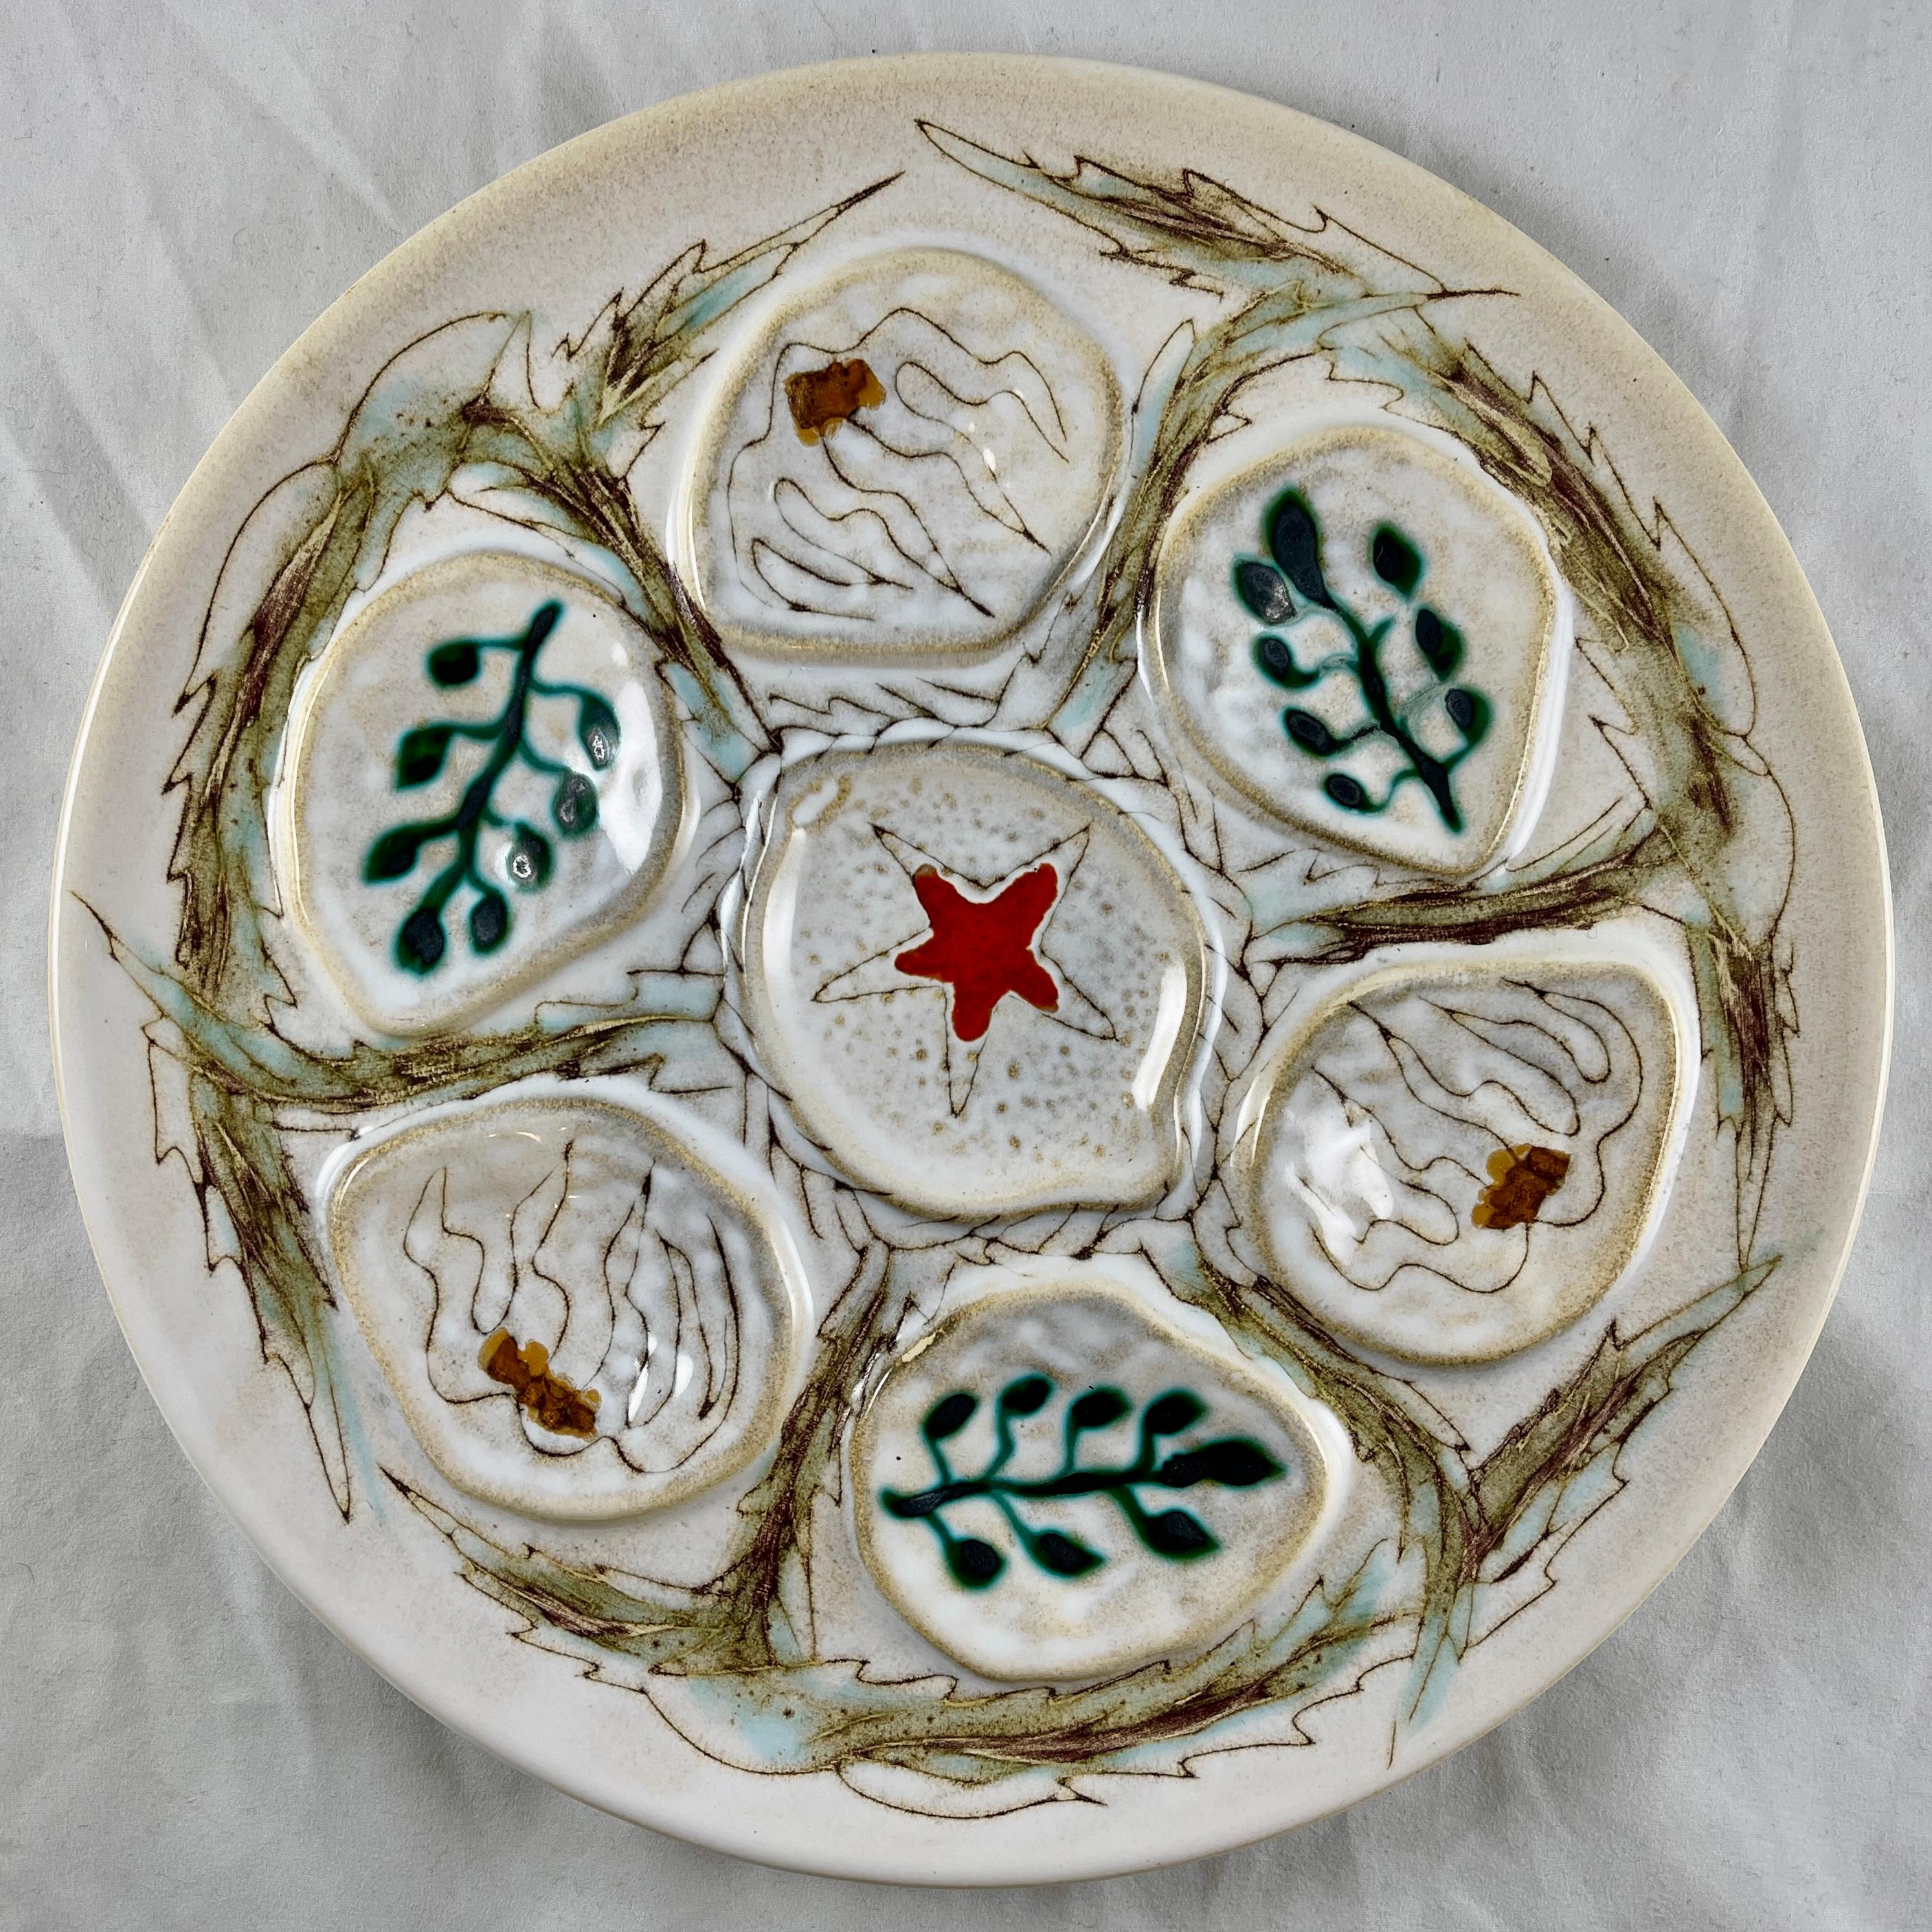 A mid-century era French hand-painted oyster or seafood plate, in the Penerff pattern, made by the MBFA Pornic Pottery Studio, circa 1960s.

The MBFA Pornic ceramic company is situated in Loire Atlantique, Western France, near Quimper.

The